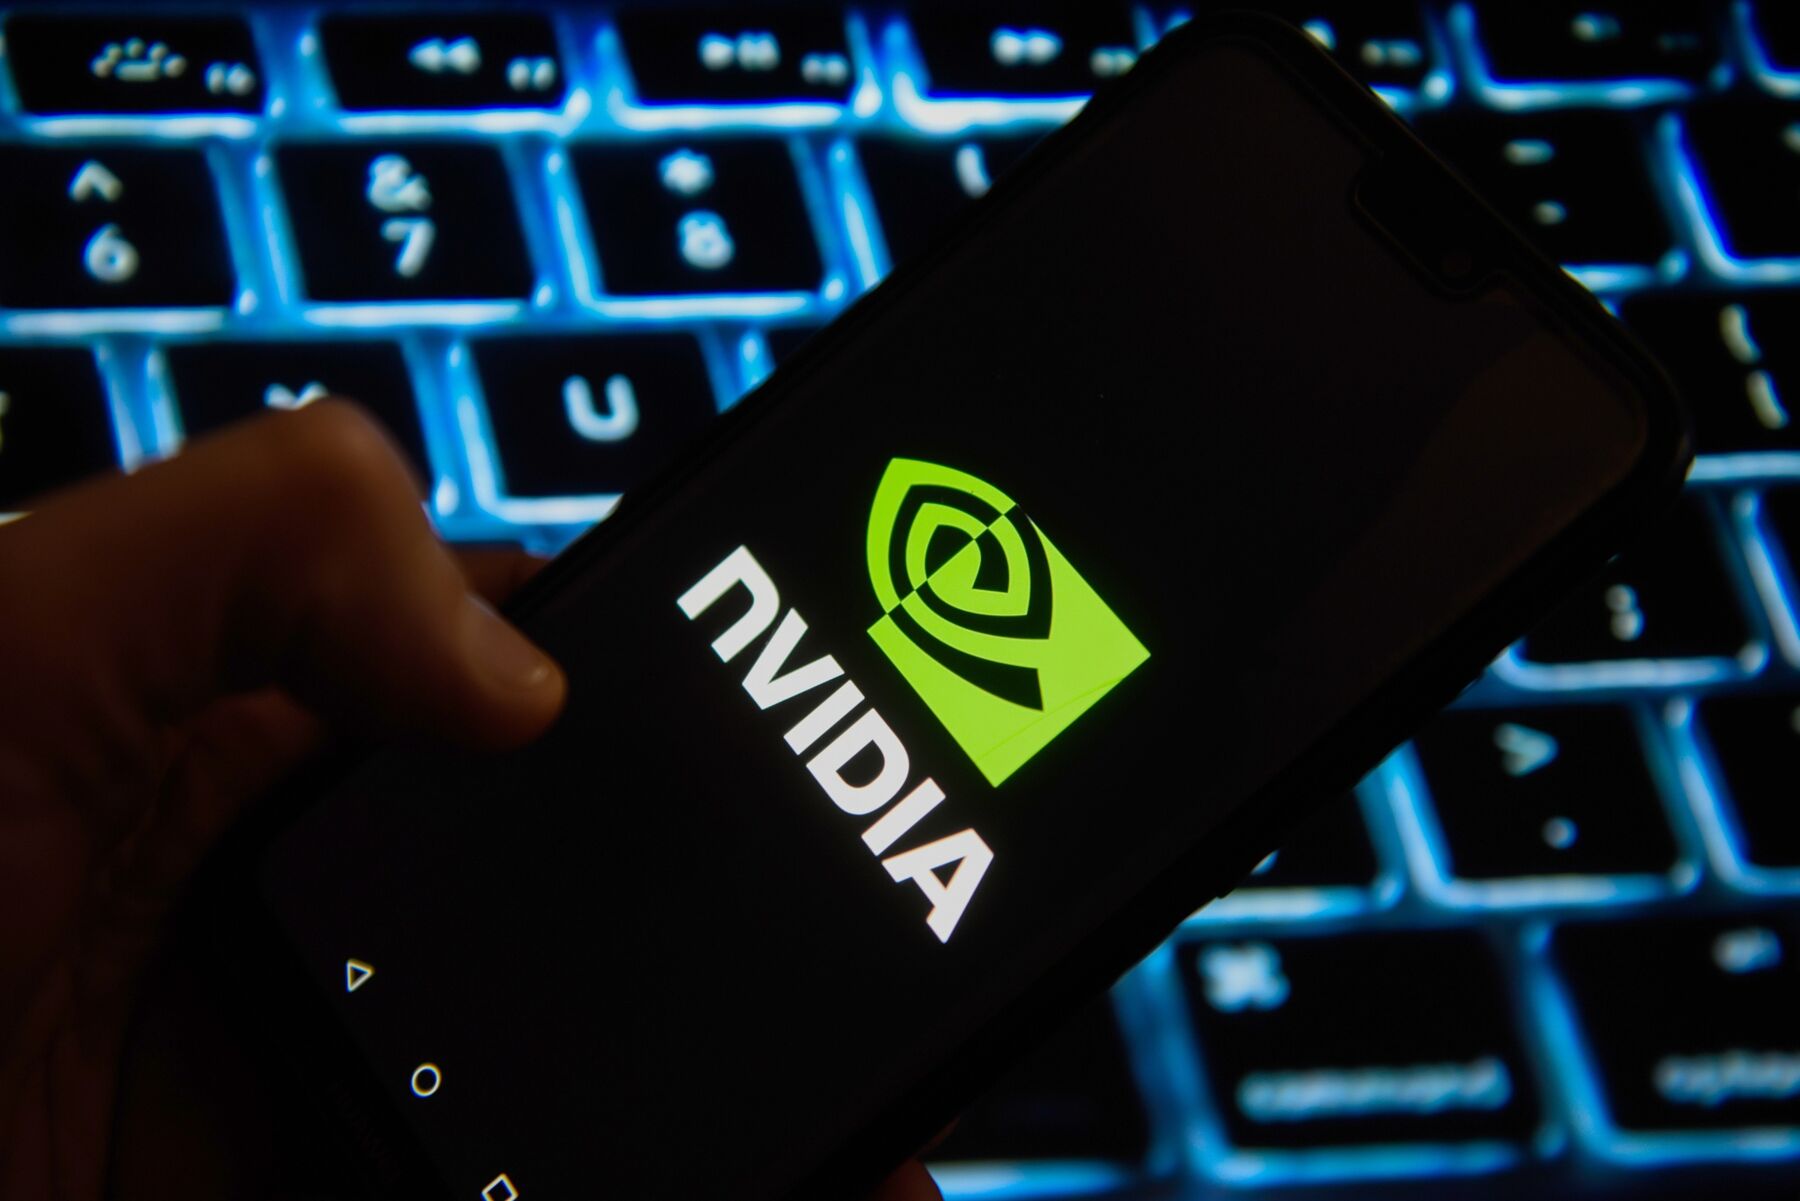 Nvidia logo on an Android mobile phone.